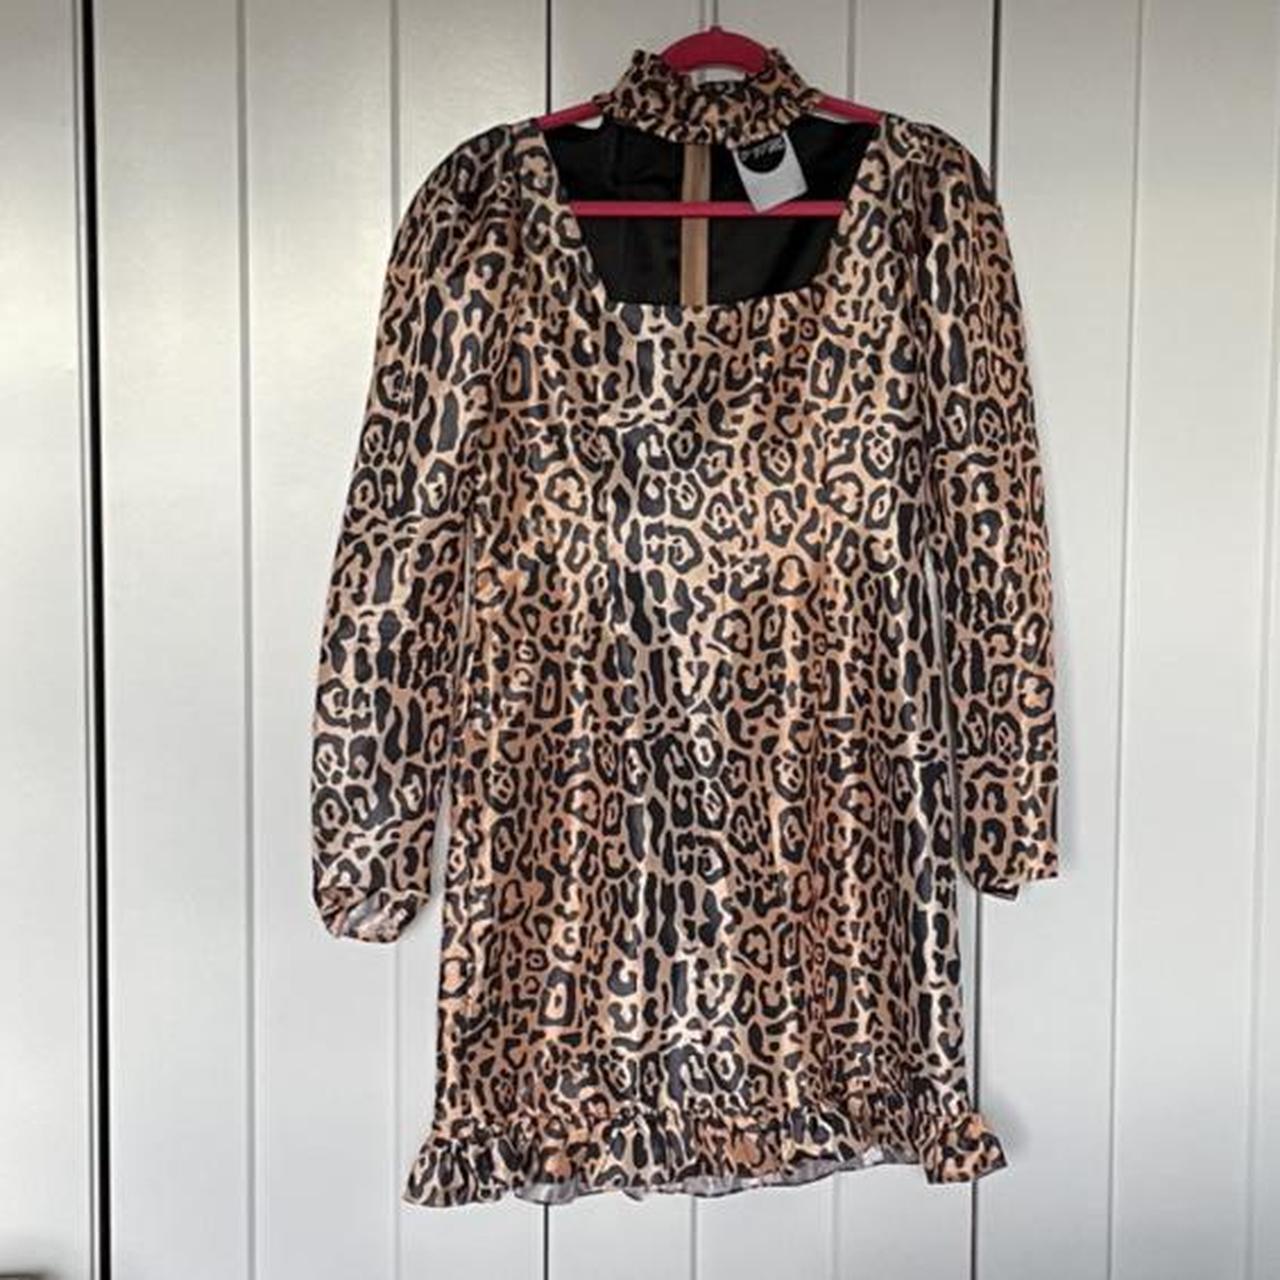 Product Image 1 - Incredible leopard taffeta dress with